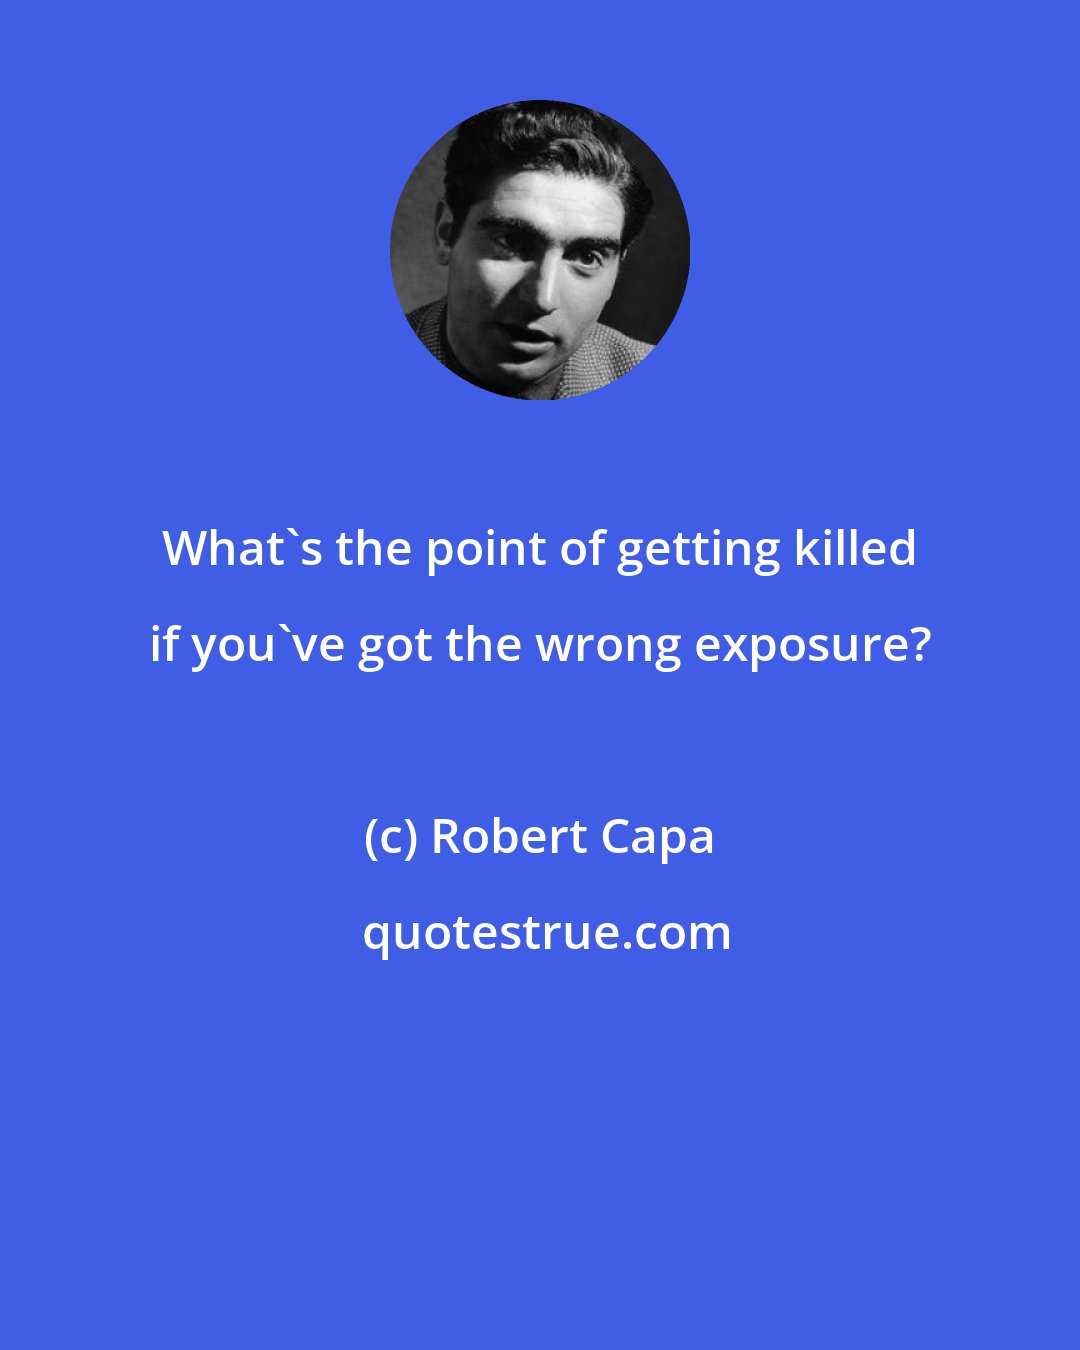 Robert Capa: What's the point of getting killed if you've got the wrong exposure?